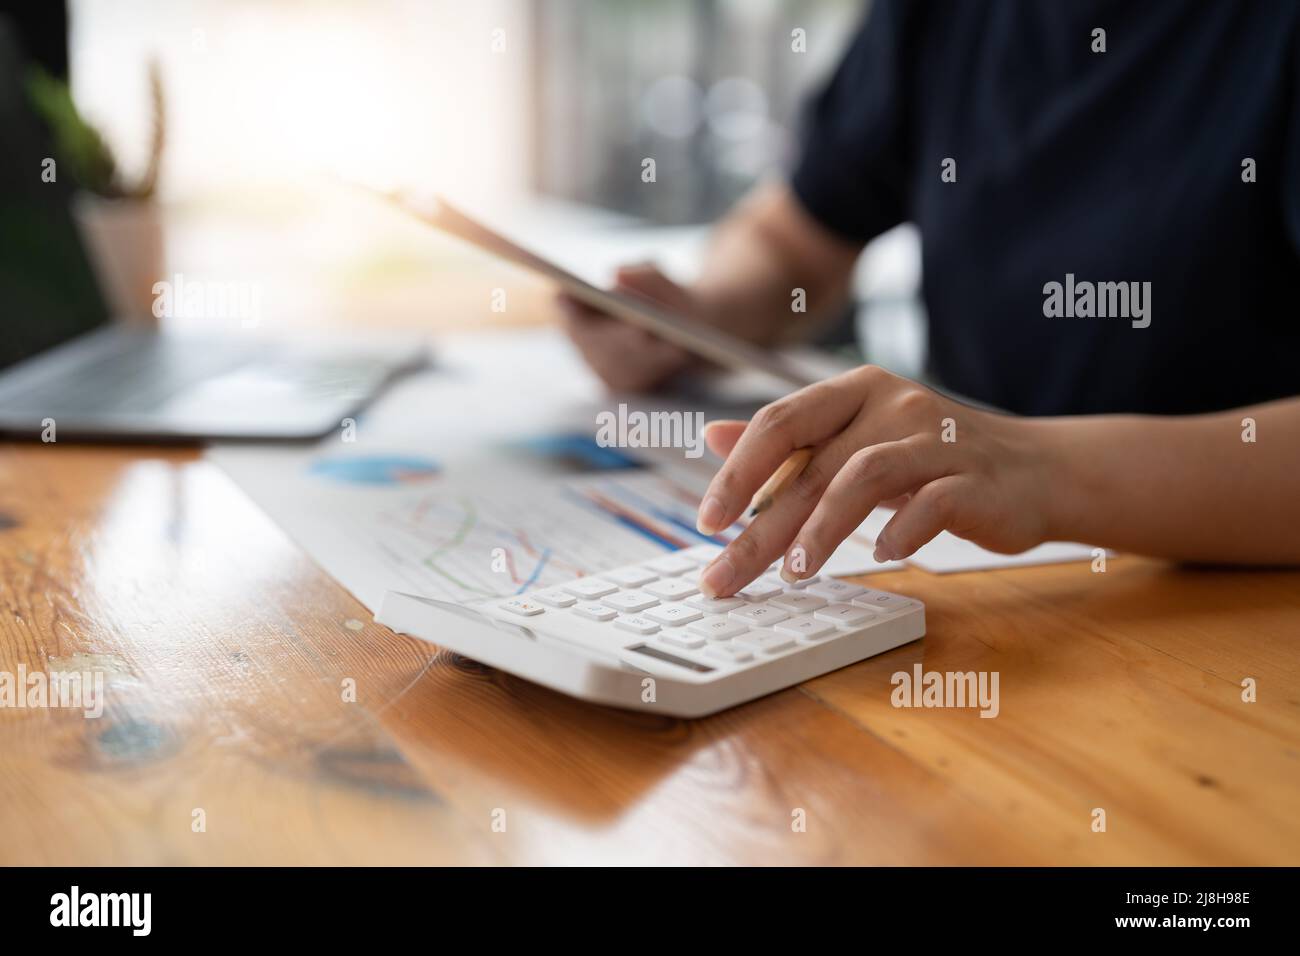 Accountant bookkeeper woman using calculator and laptop for do math finance on wooden desk in office and business working background, tax, accounting Stock Photo